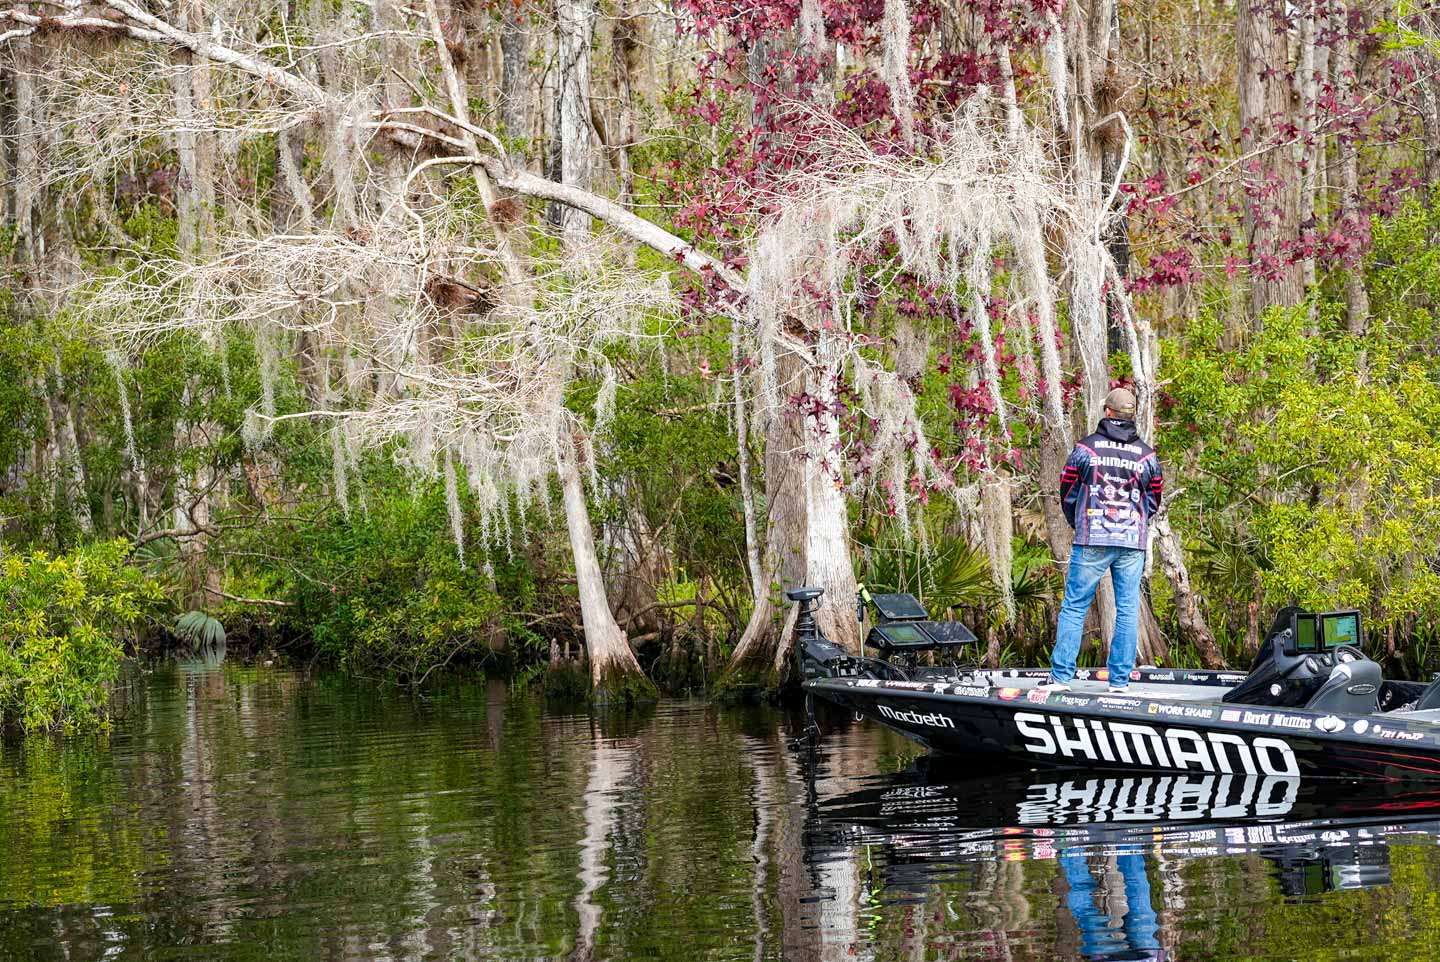 As Cliff Prince and Drew Benton analyzed on Bassmaster LIVE Mix, the bass will spawn in the small pockets like the one in this photo. It allows the fish to get out of the current, and they don’t have to go far. “These fish only move about five feet when they decide to spawn,” said Prince. 
